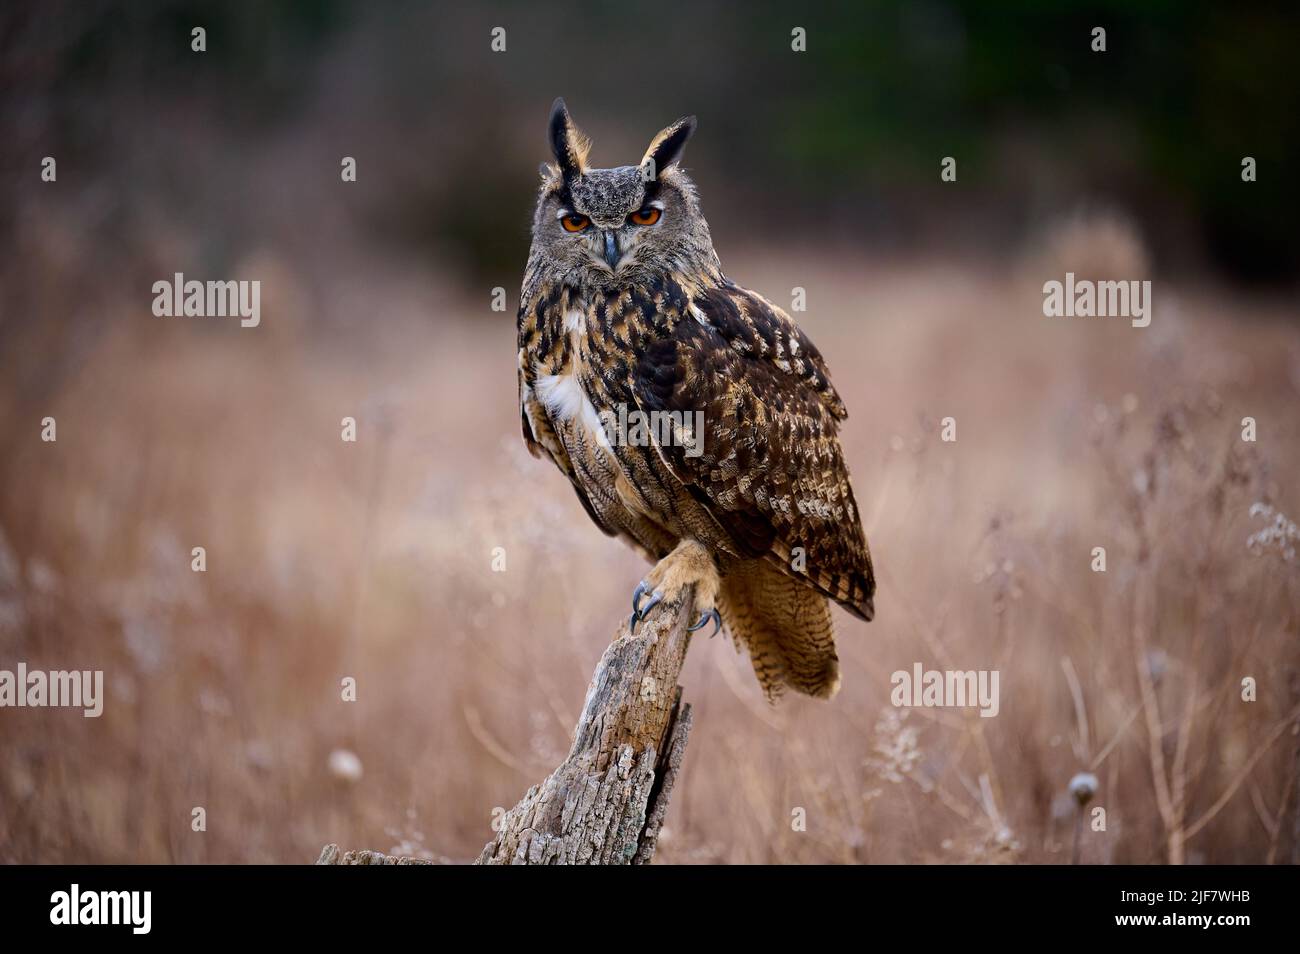 Great Horned Owl (Bubo virginianus) perched on tree trunk. Hunting field mice Stock Photo